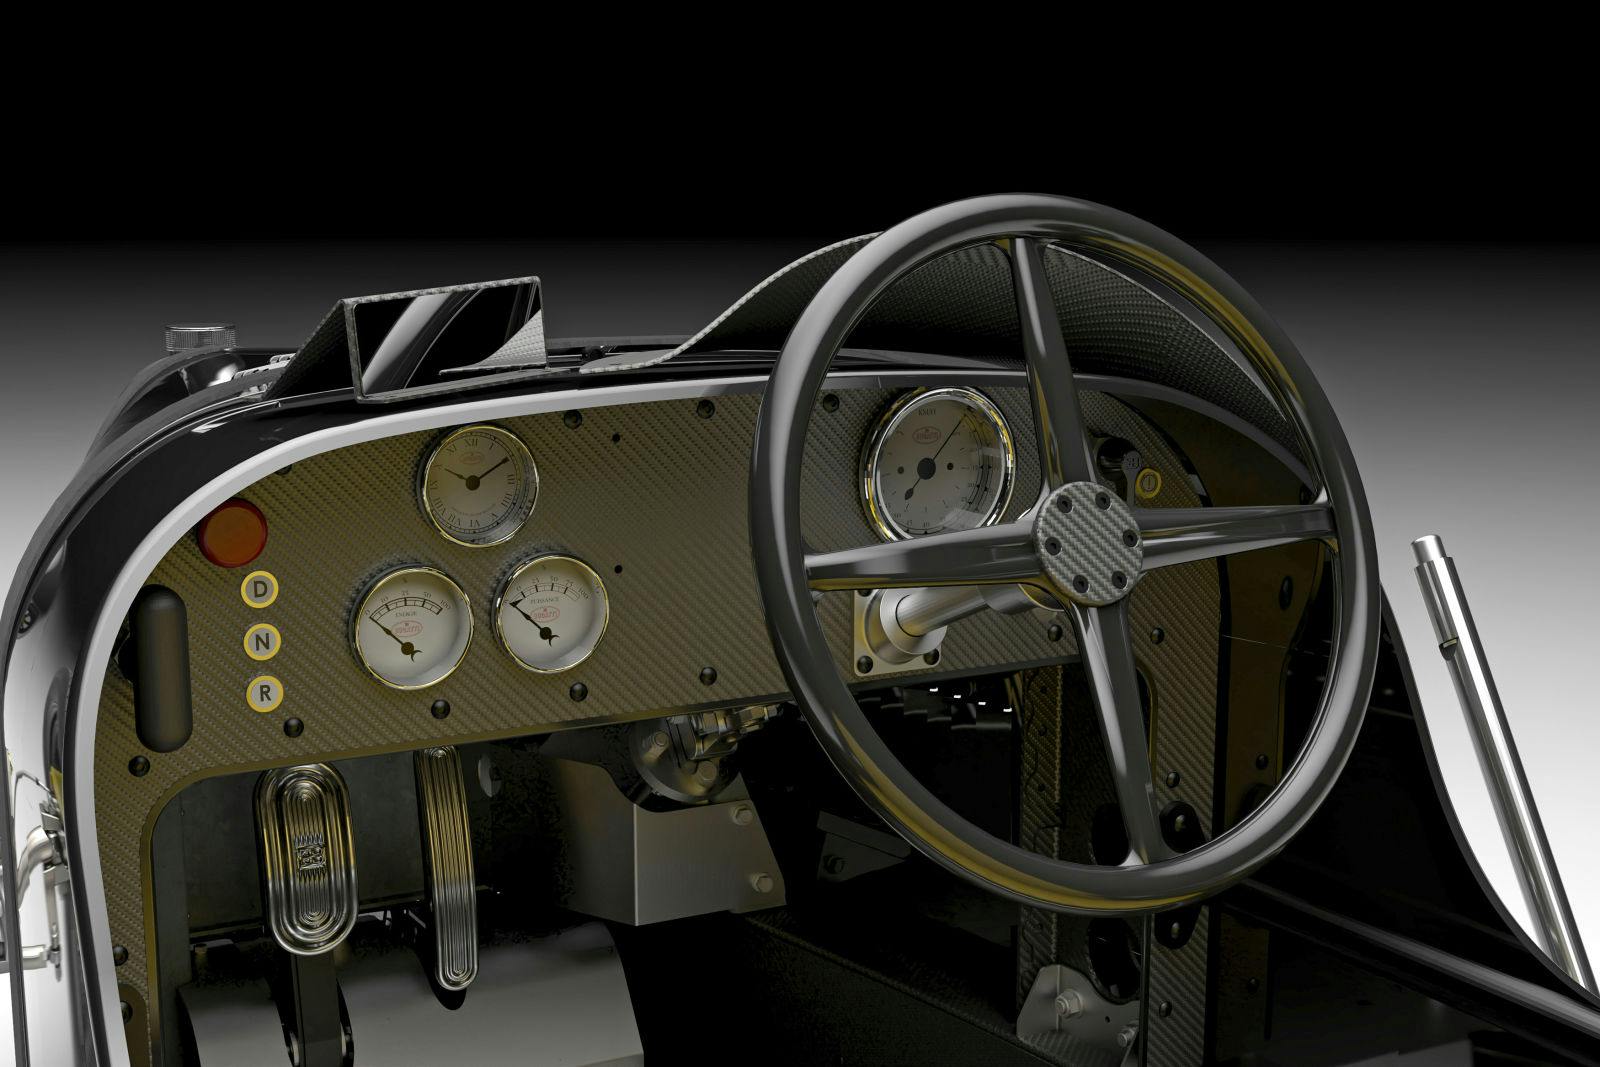 The interior design of the Baby II Carbon Edition is inspired by the original Bugatti Type 35.